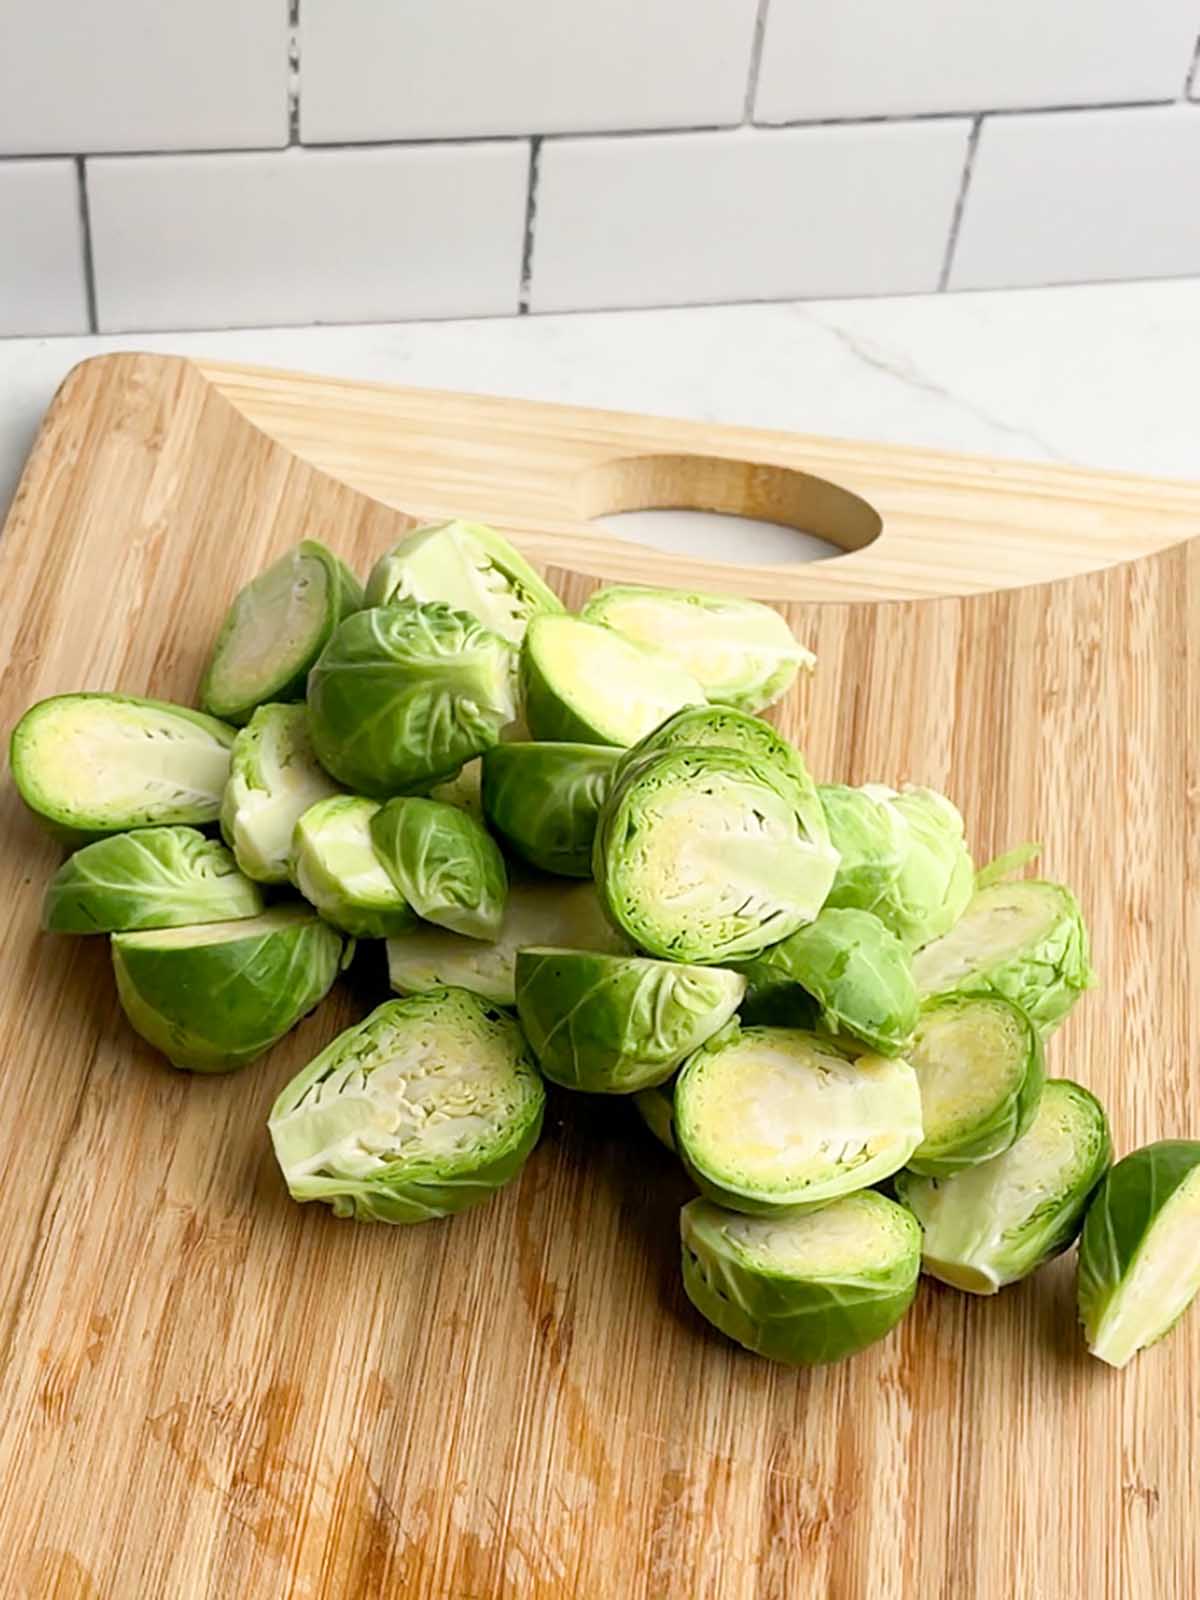 halved brussels sprouts on a wooden cutting board